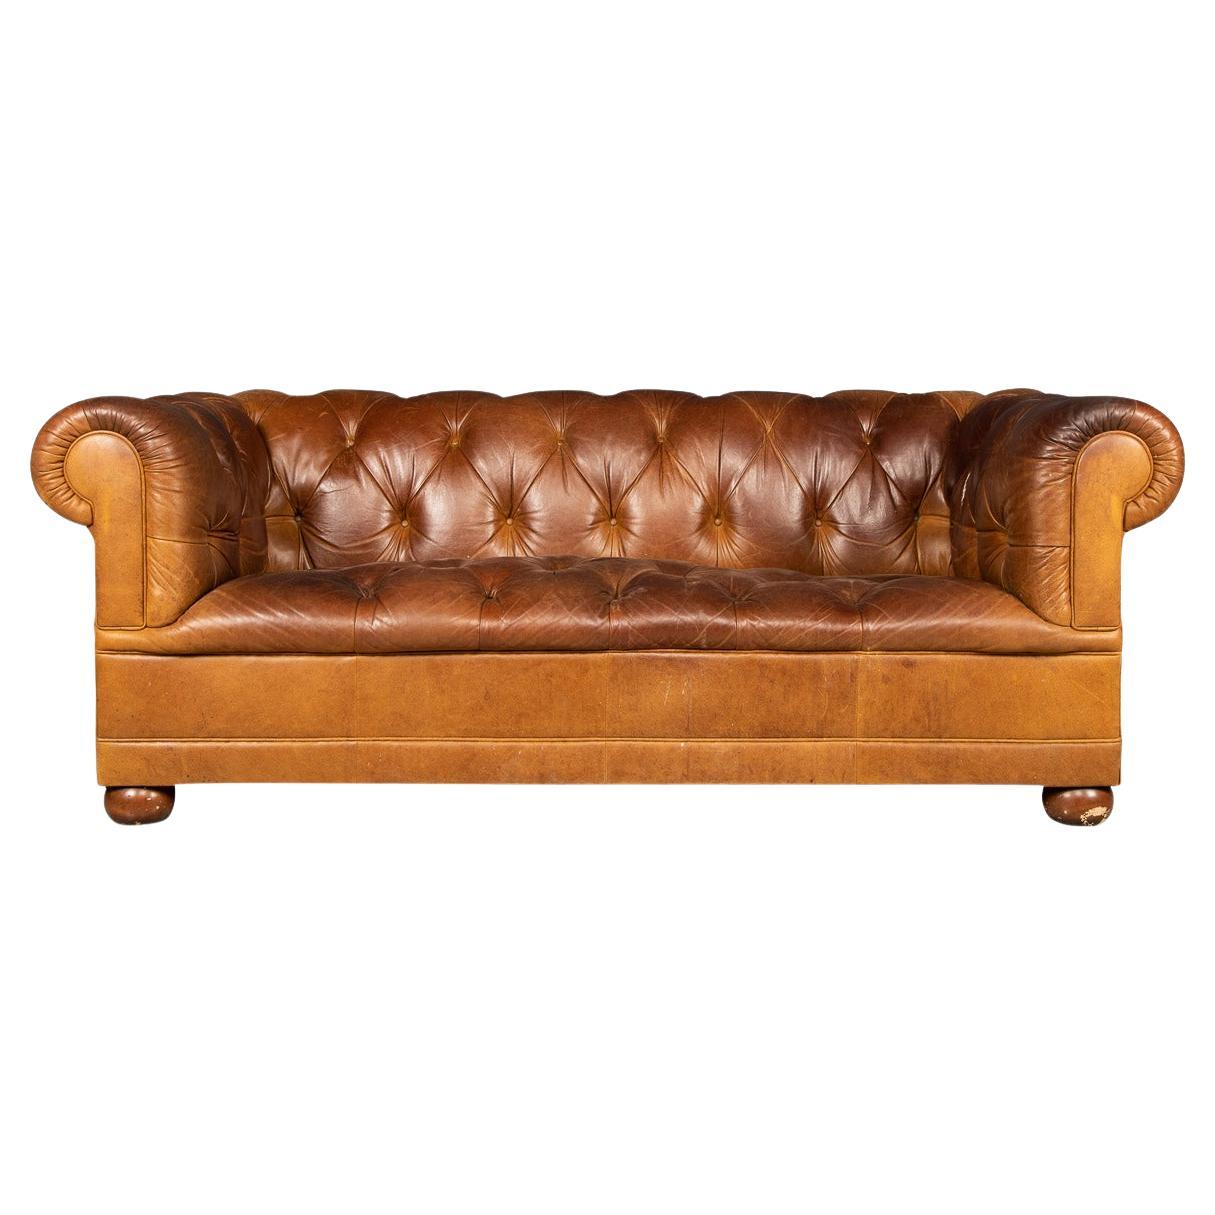 20th Century Chesterfield Leather Sofa by Laura Ashley, England, c.1970